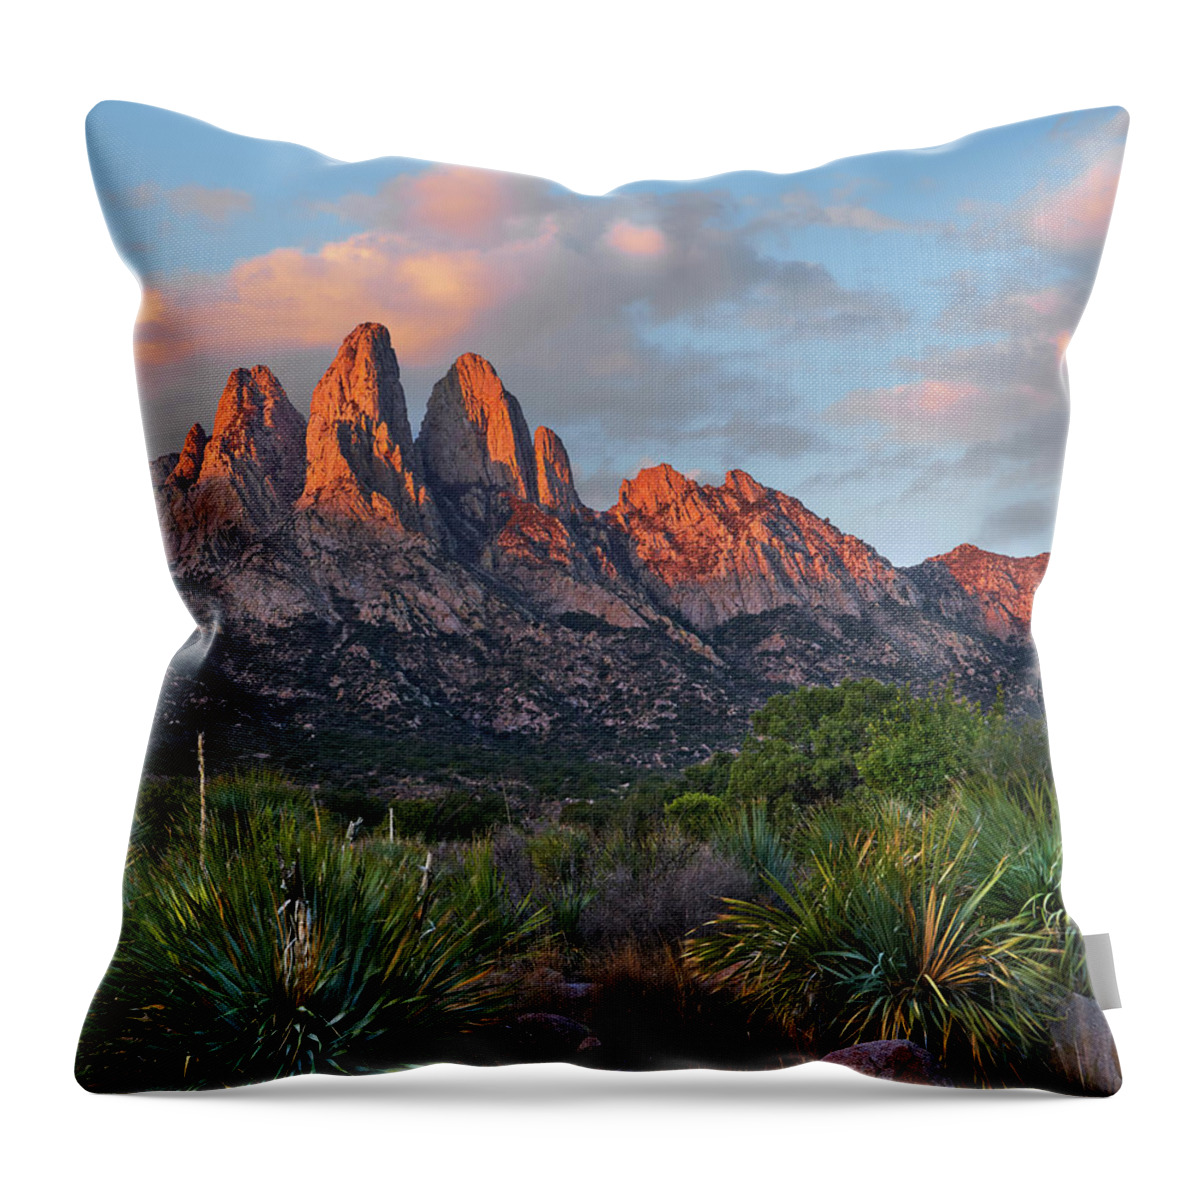 00557650 Throw Pillow featuring the photograph Agave, Organ Mts, Aguirre Spring Nra, New Mexico by Tim Fitzharris